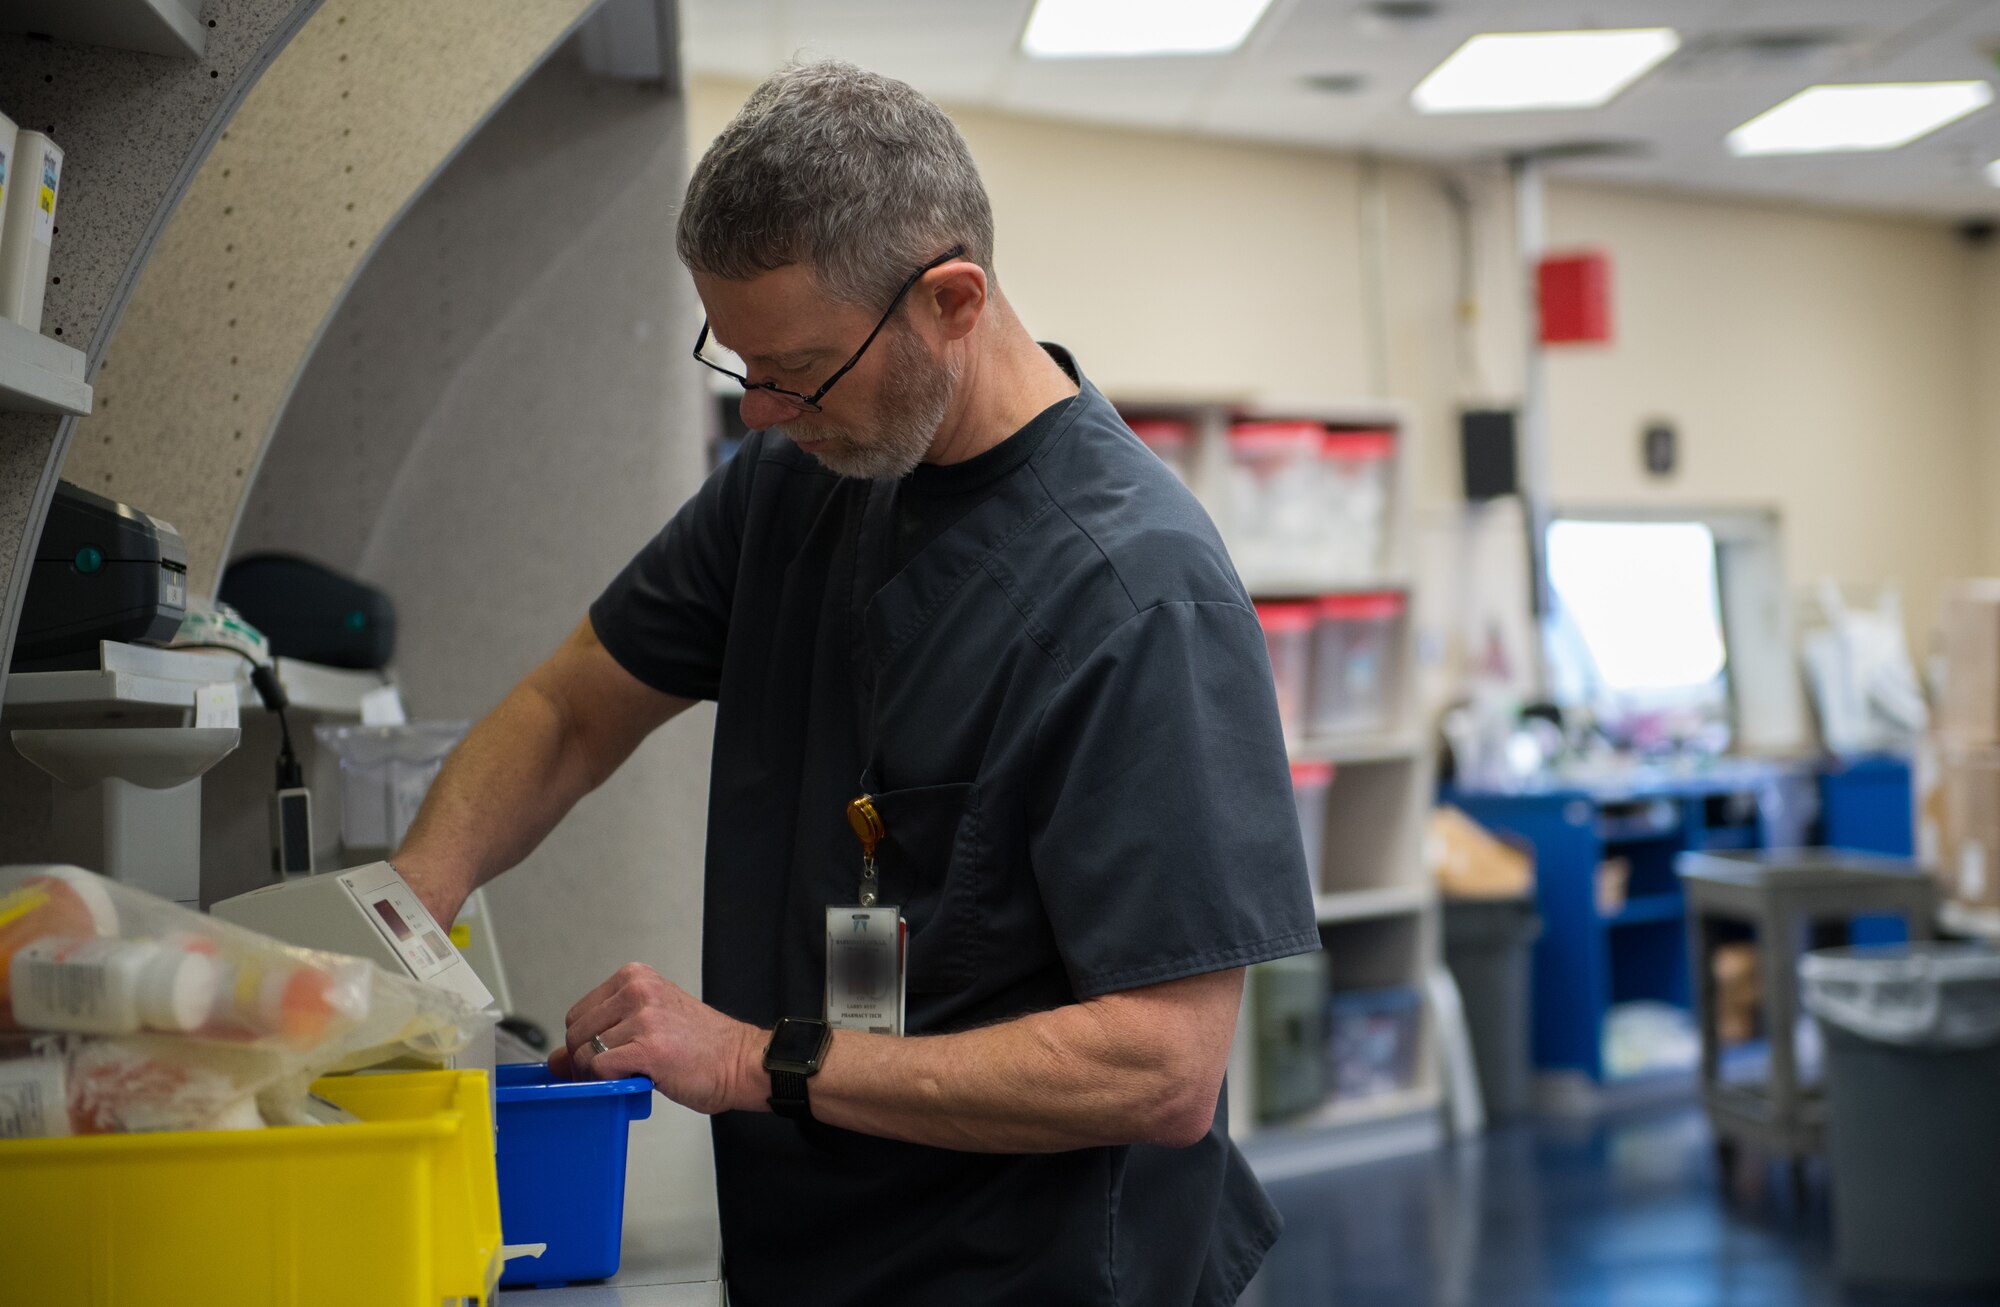 Larry Rusk, 2nd Medical Group Satellite Pharmacy technician, prepares medications at Barksdale Air Force Base, La., Feb. 5, 2019. The pharmacy process 300 to 400 new prescriptions every day. This photo has been altered for security purposes. (U.S. Air Force photo by Senior Airman Cassandra Johnson)